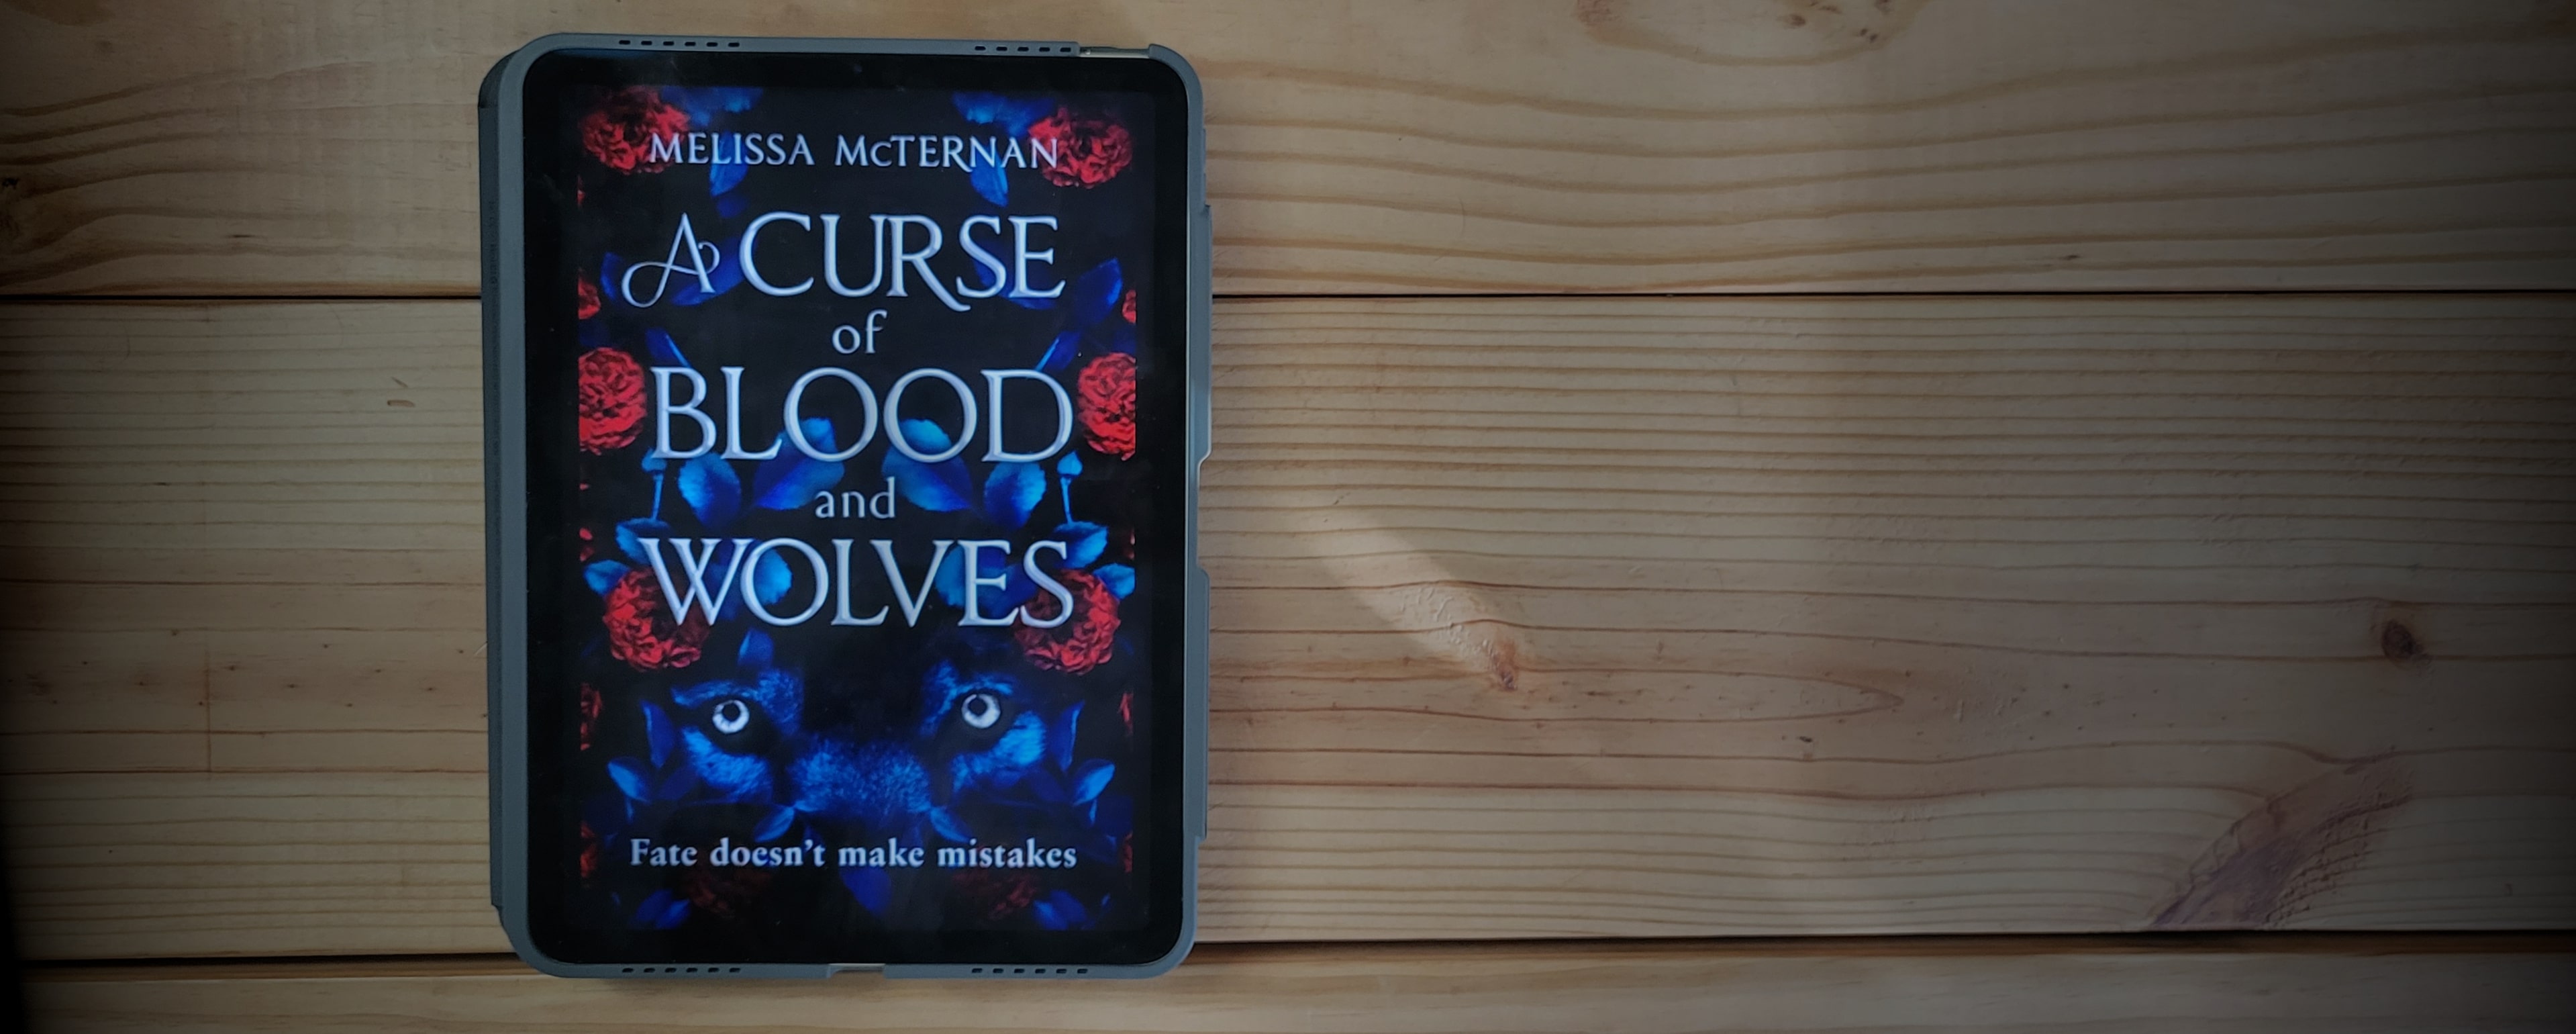 Book cover of A Curse of Blood and Wolves by Melissa McTernan